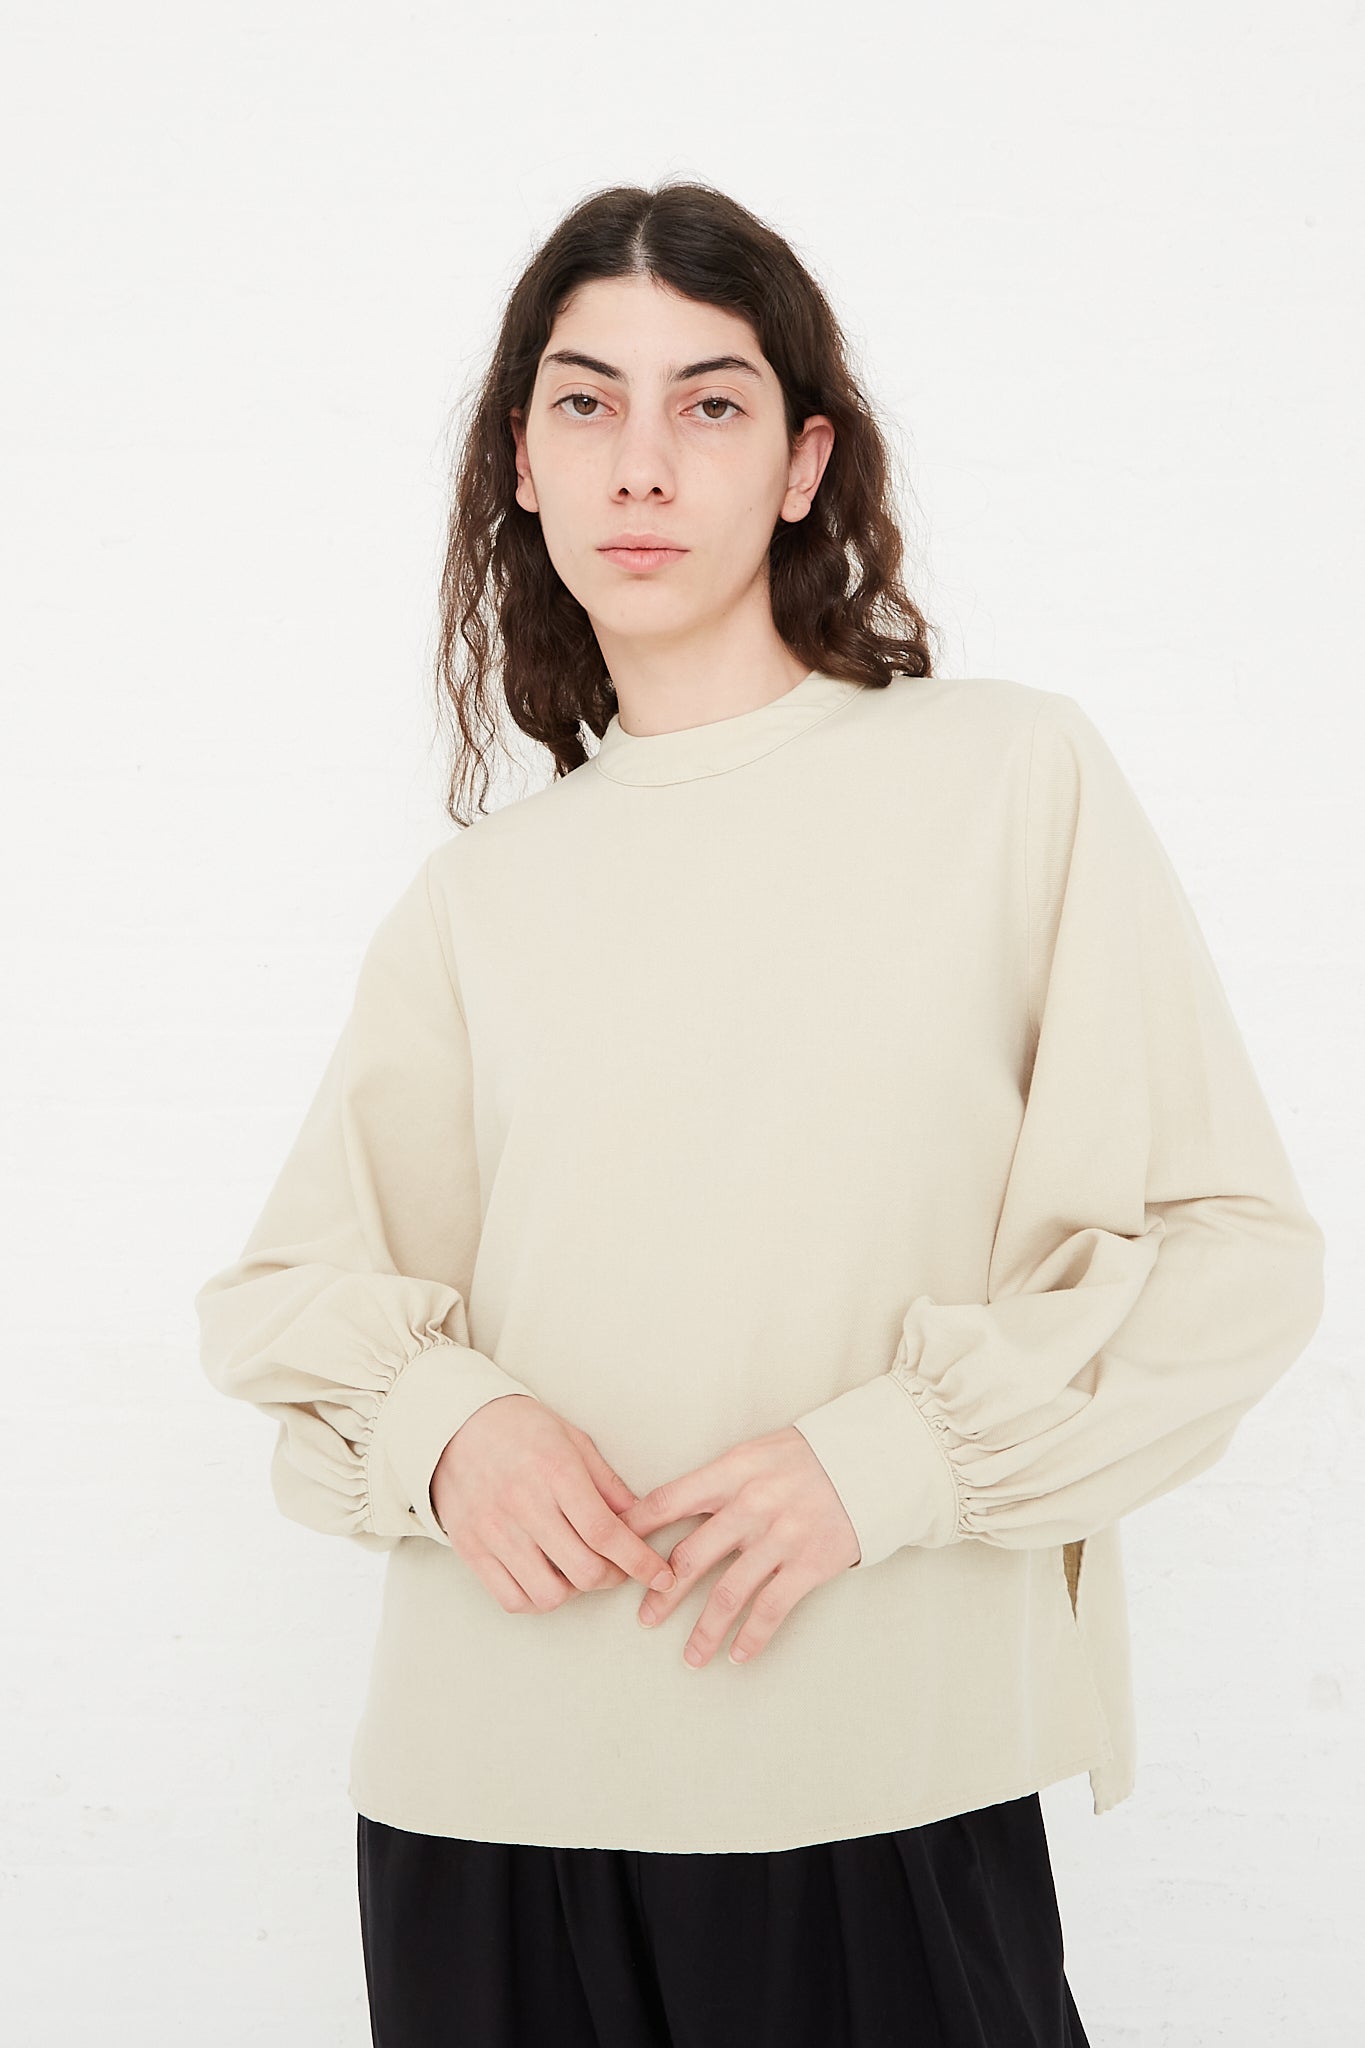 The model is wearing a Black Crane Cotton Twill Puff Sleeve Blouse in Ivory. Front view.